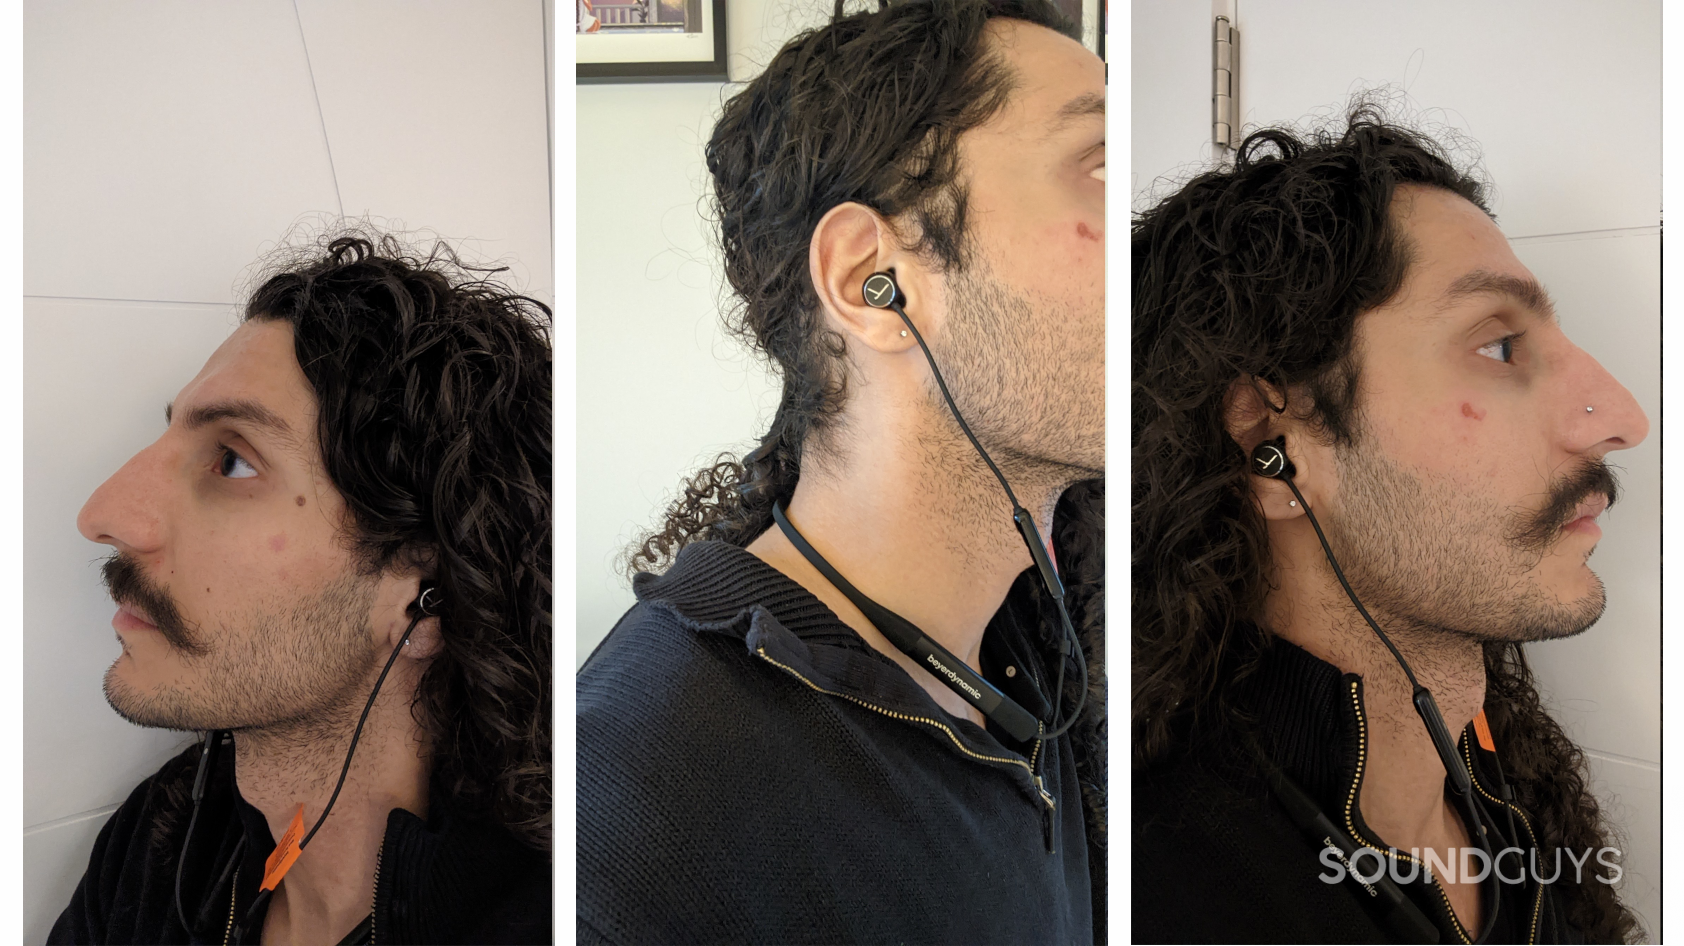 Three images of the beyerdynamic Blue Byrd (2nd generation) being worn. From left to right the images are of the left bud in a person's ear, the band draped around a person's neck, and the right bud in a person's ear.